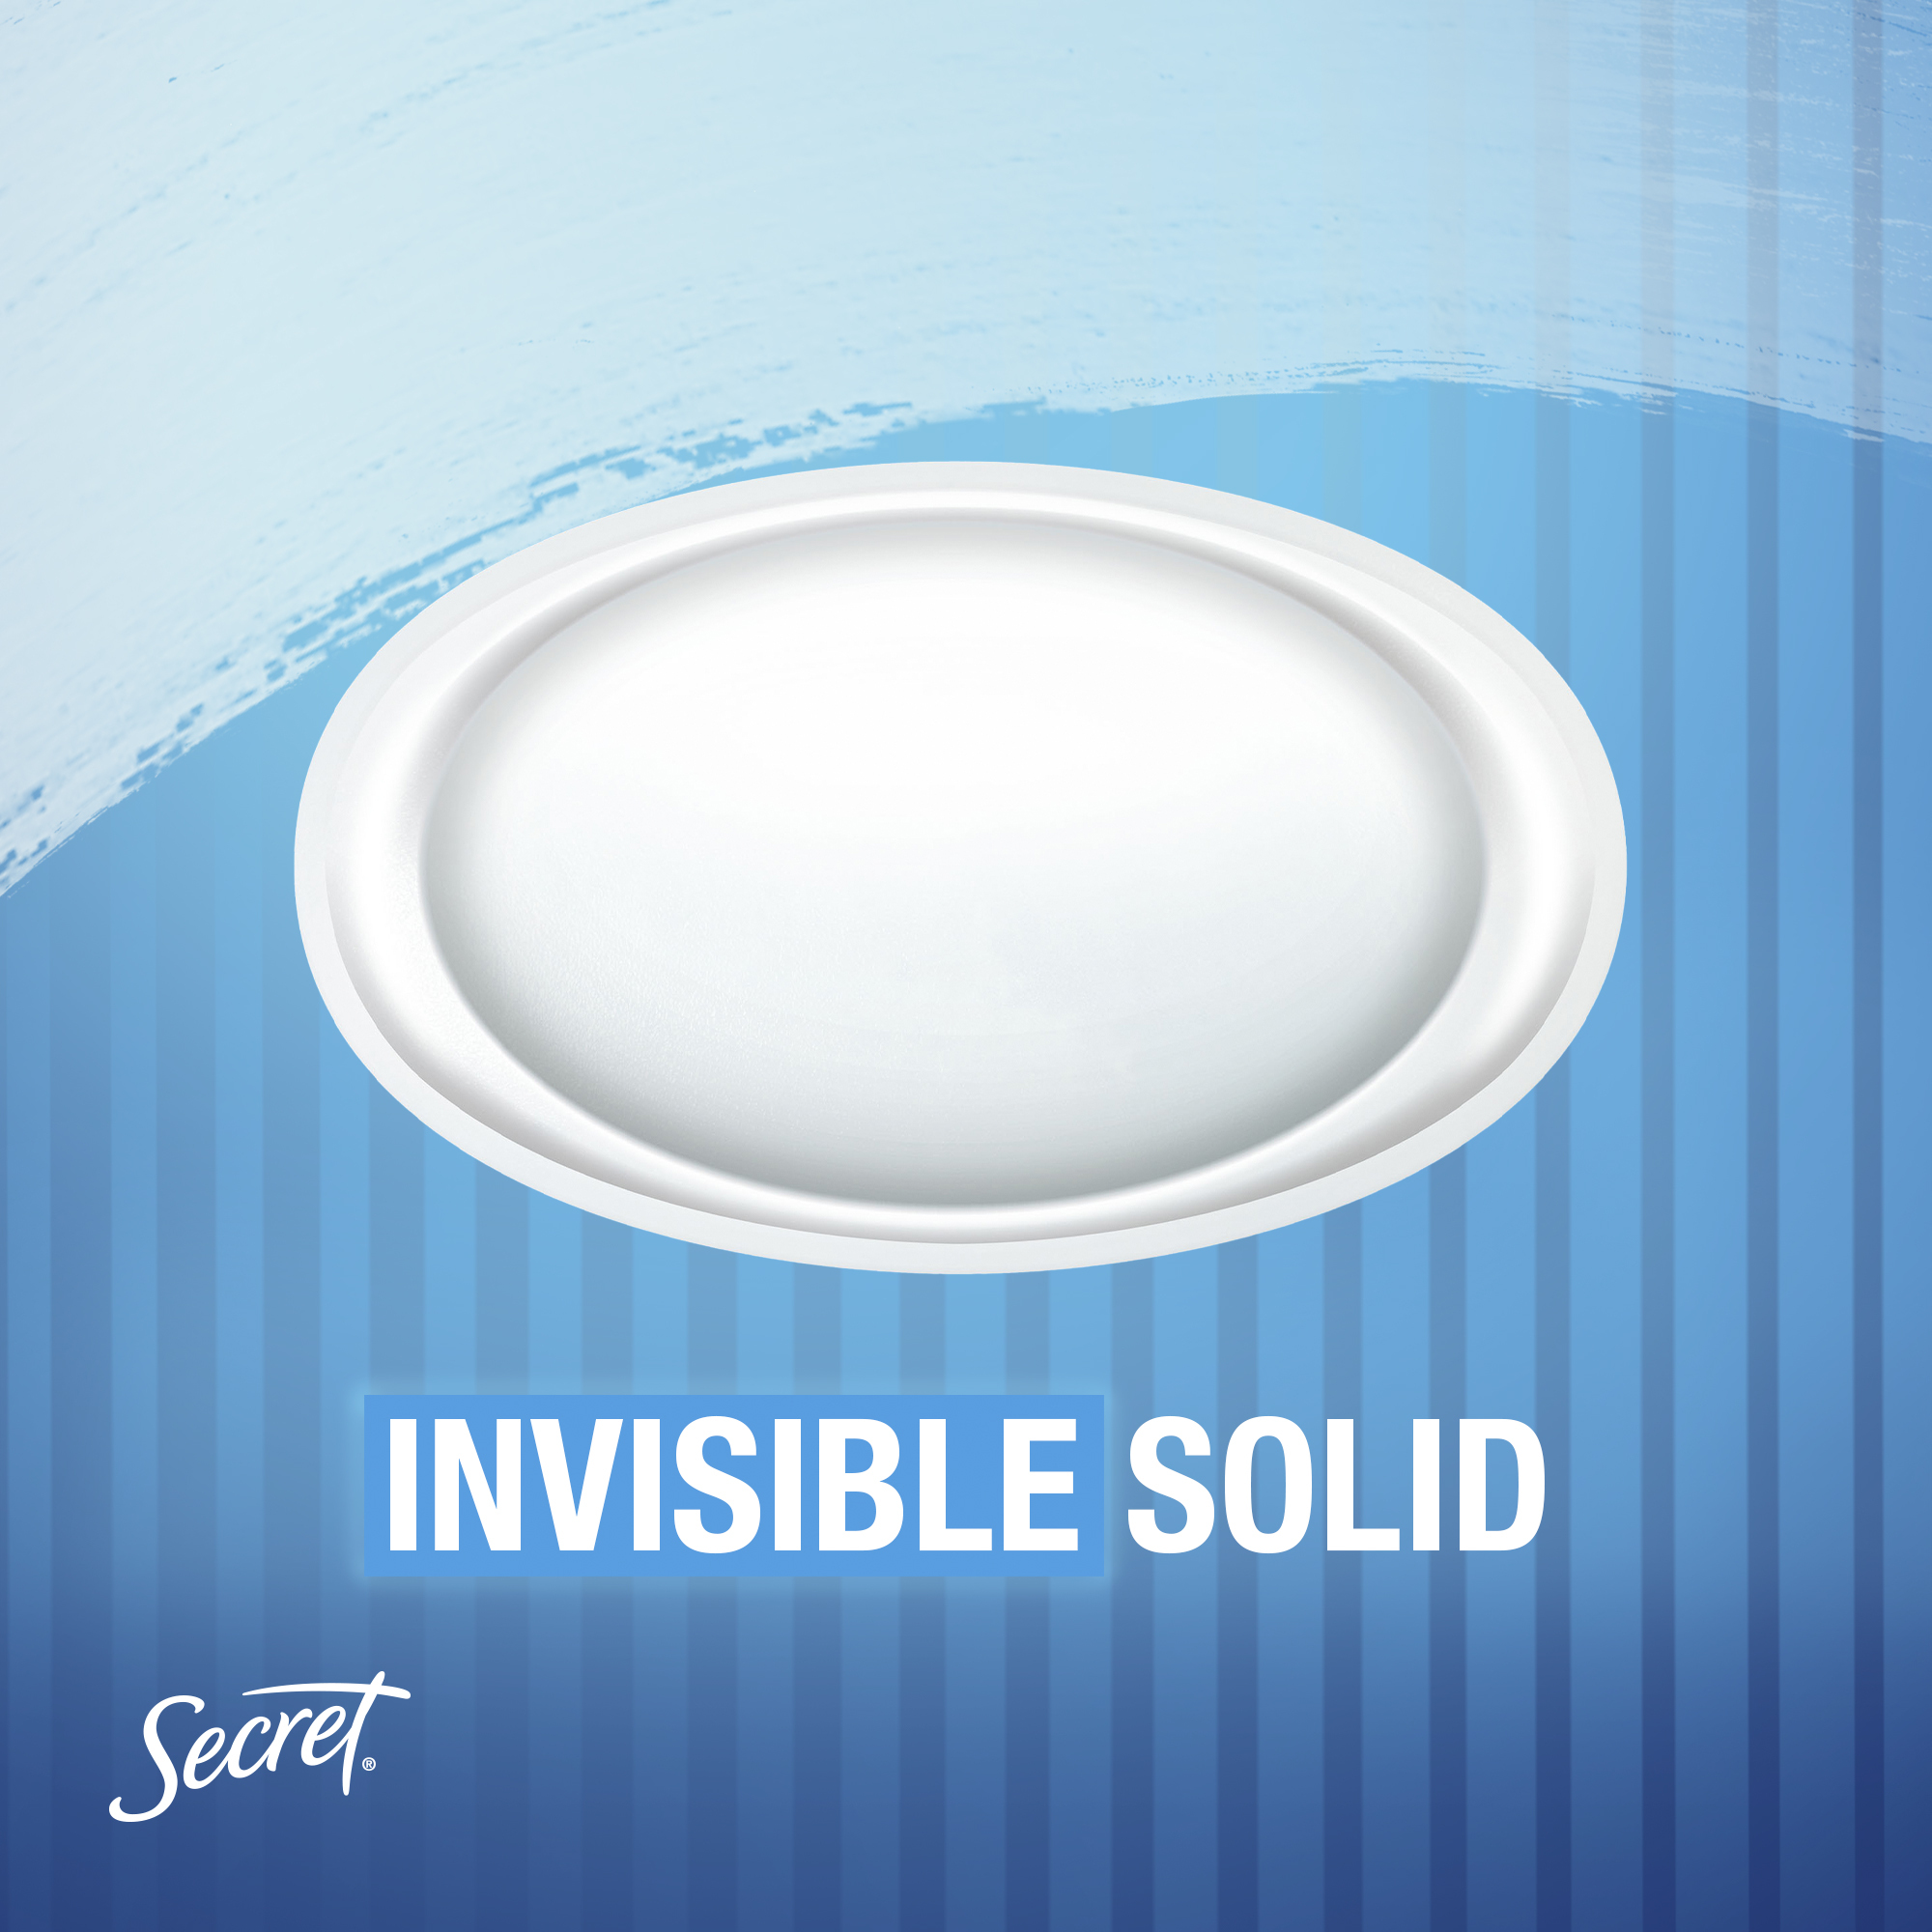 Secret Outlast Invisible Solid Antiperspirant and Deodorant Completely Clean, 2.6 oz Pack of 2 - image 5 of 9